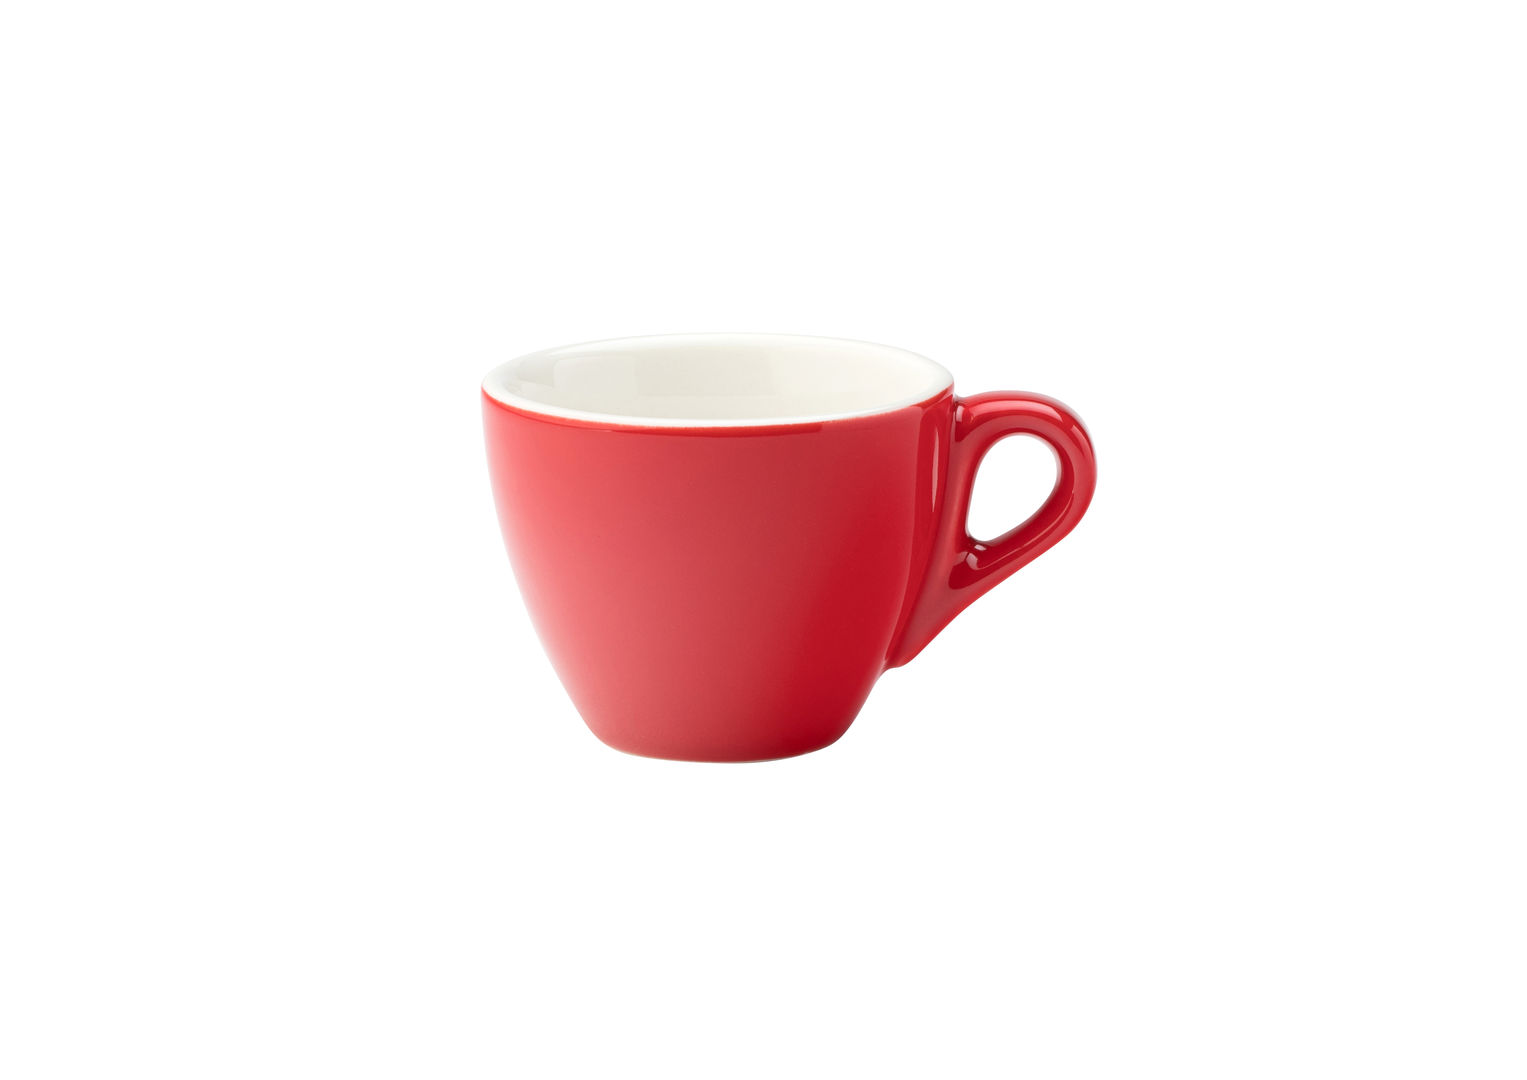 Barista Espresso Red Cup 2.75oz (8cl) - CT8140-000000-B01012 (Pack of 12)